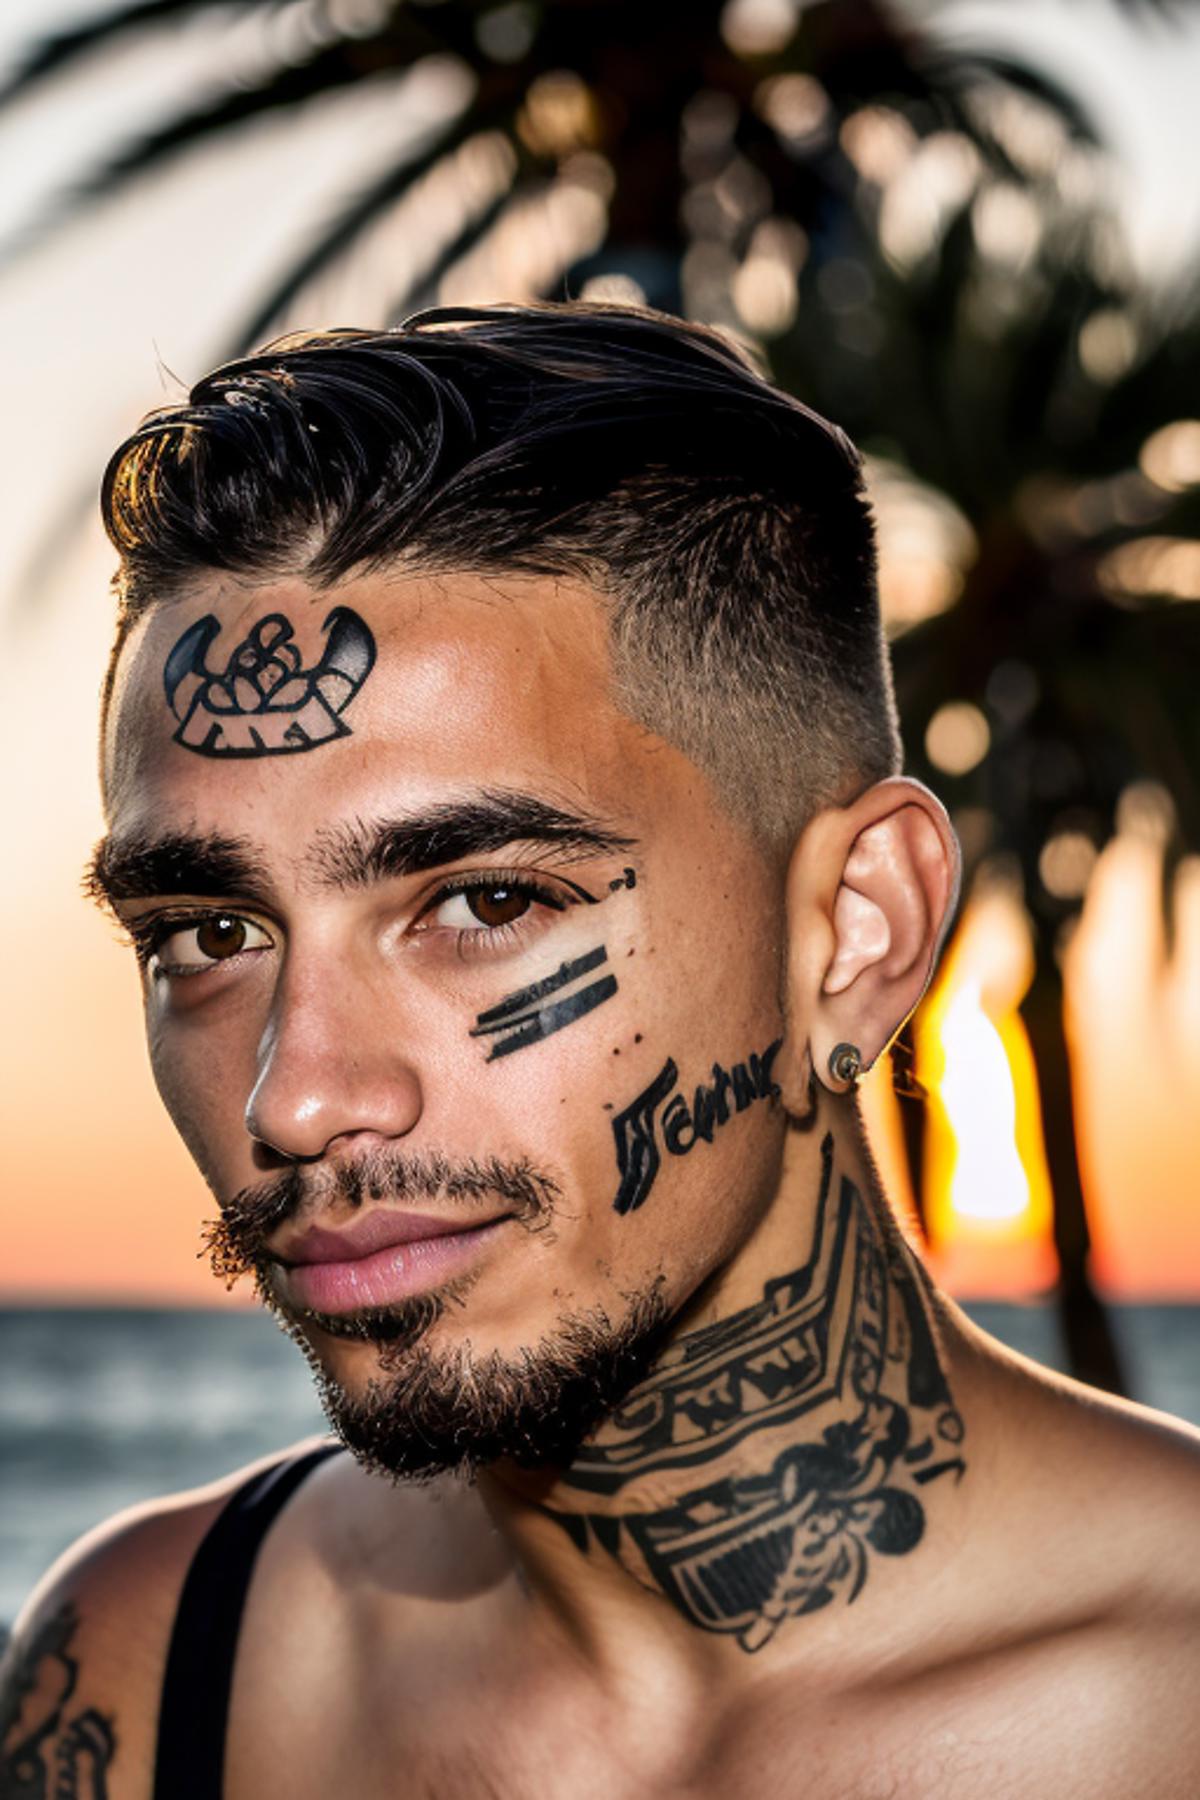 Meaning of Facial Tattoos: The interpretation and patterns of tattoos on the face.